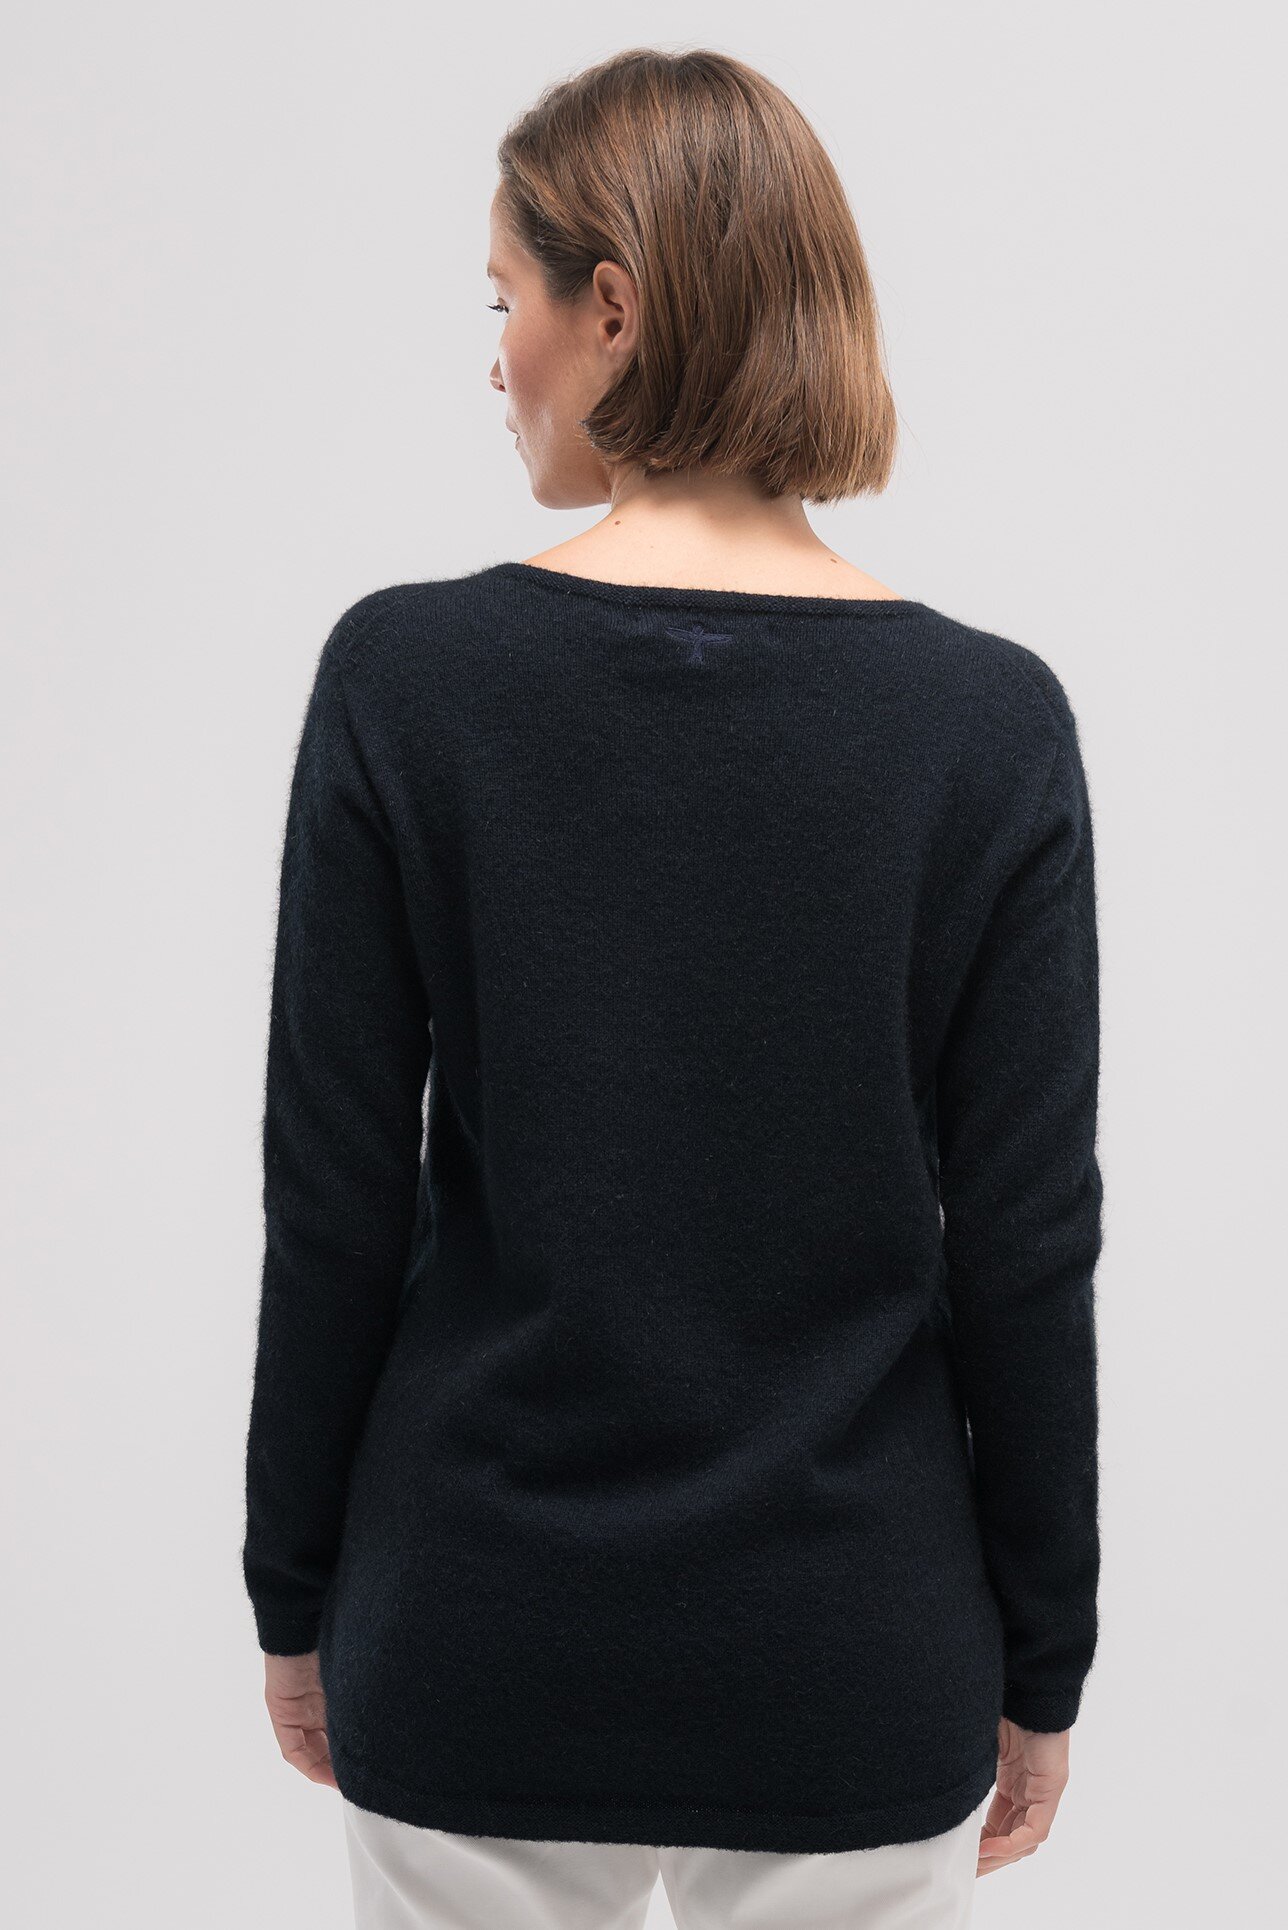 Essence Sweater (Midnight) - Labels-Untouched World : Just Looking ...